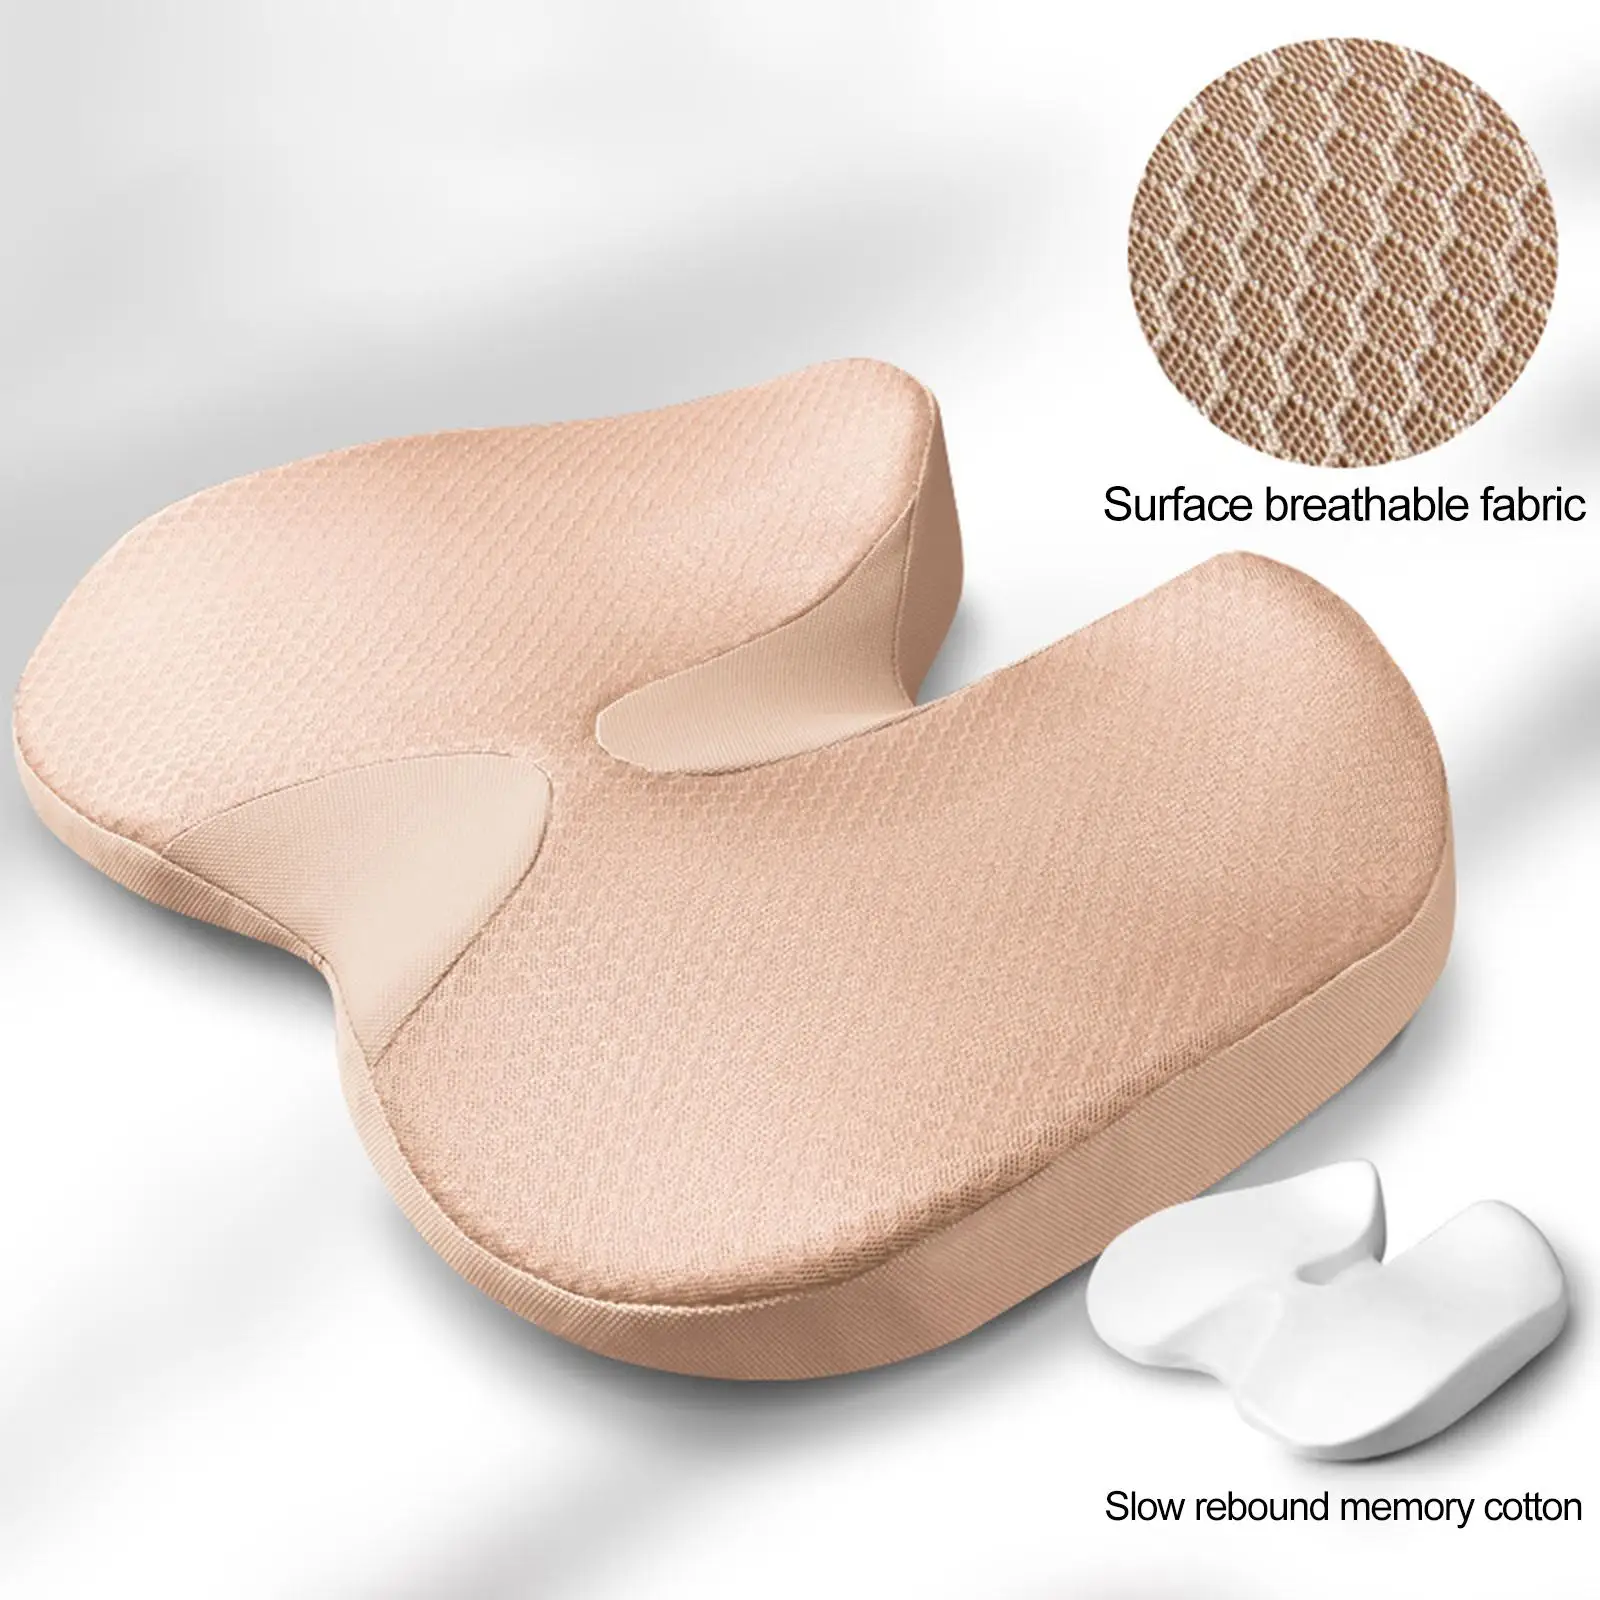 Breathable Chair Seat Cushion Non Slip Orthopedic Cusion Seat Pad Removeable Cover Car Seat Cushion Comfort for Travel Driving